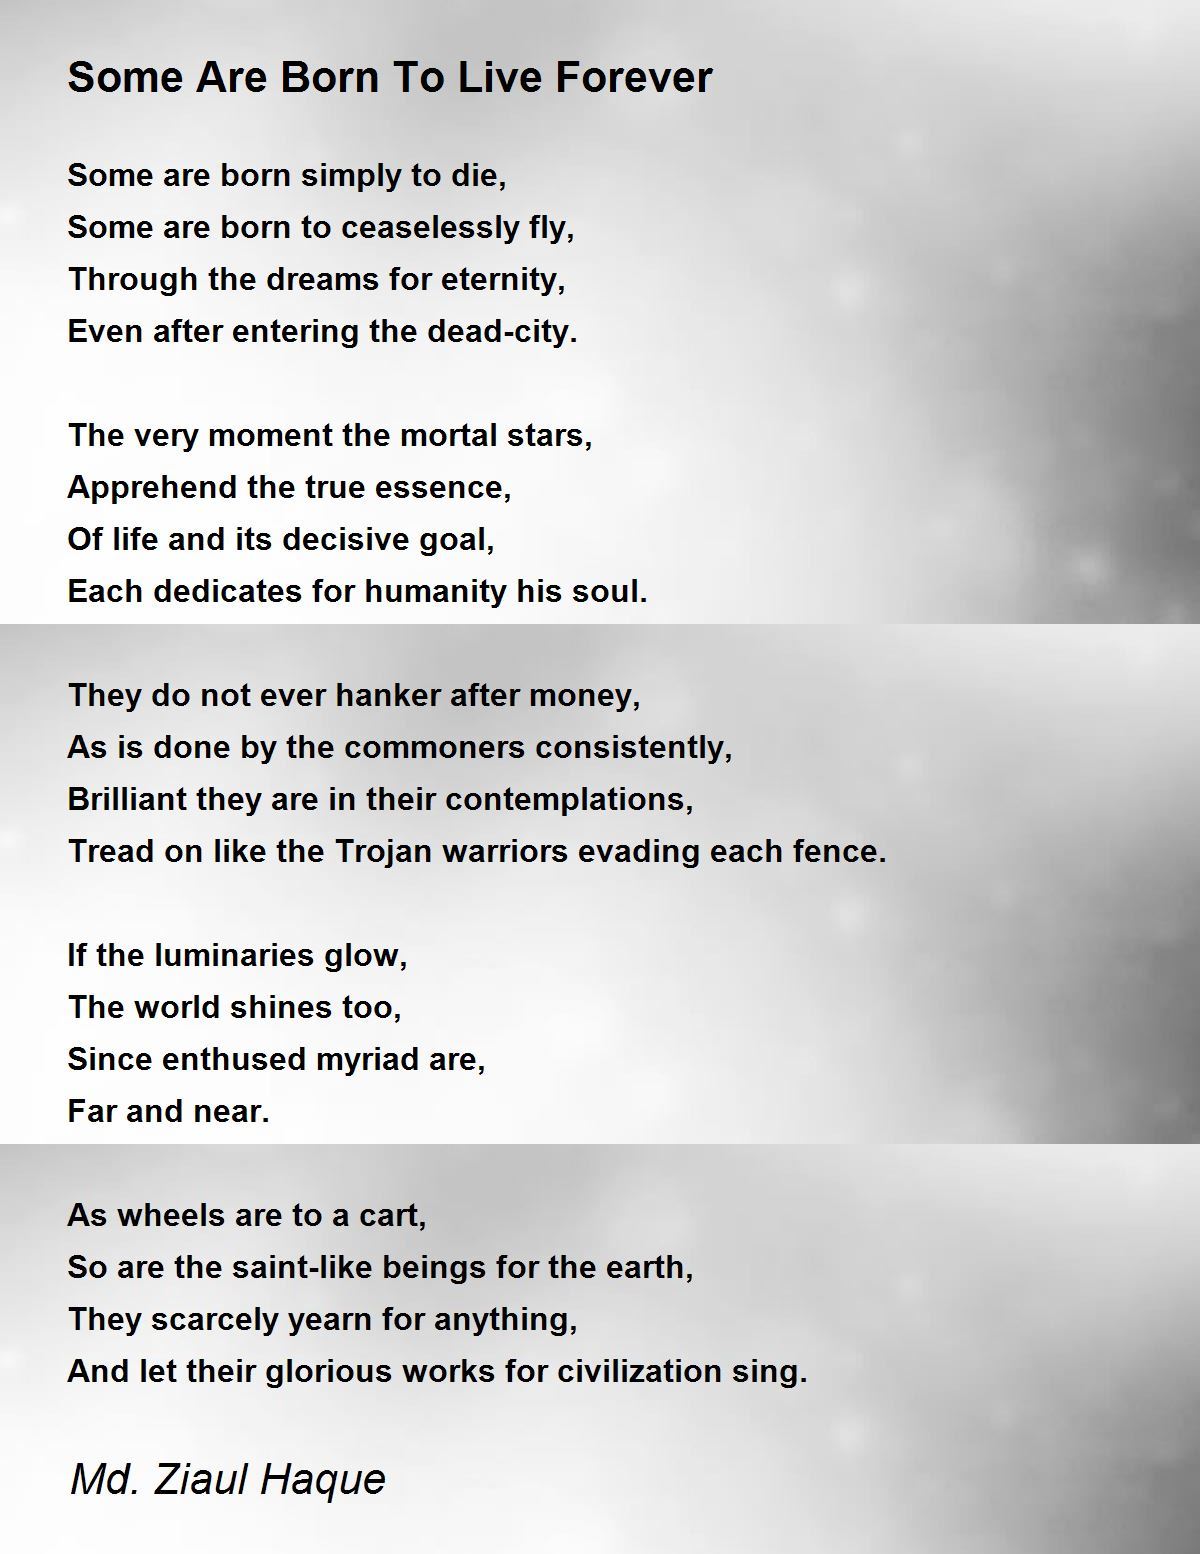 The Joy Of Creation [fiverse: Poem Of Five Lines] - The Joy Of Creation  [fiverse: Poem Of Five Lines] Poem by Md. Ziaul Haque